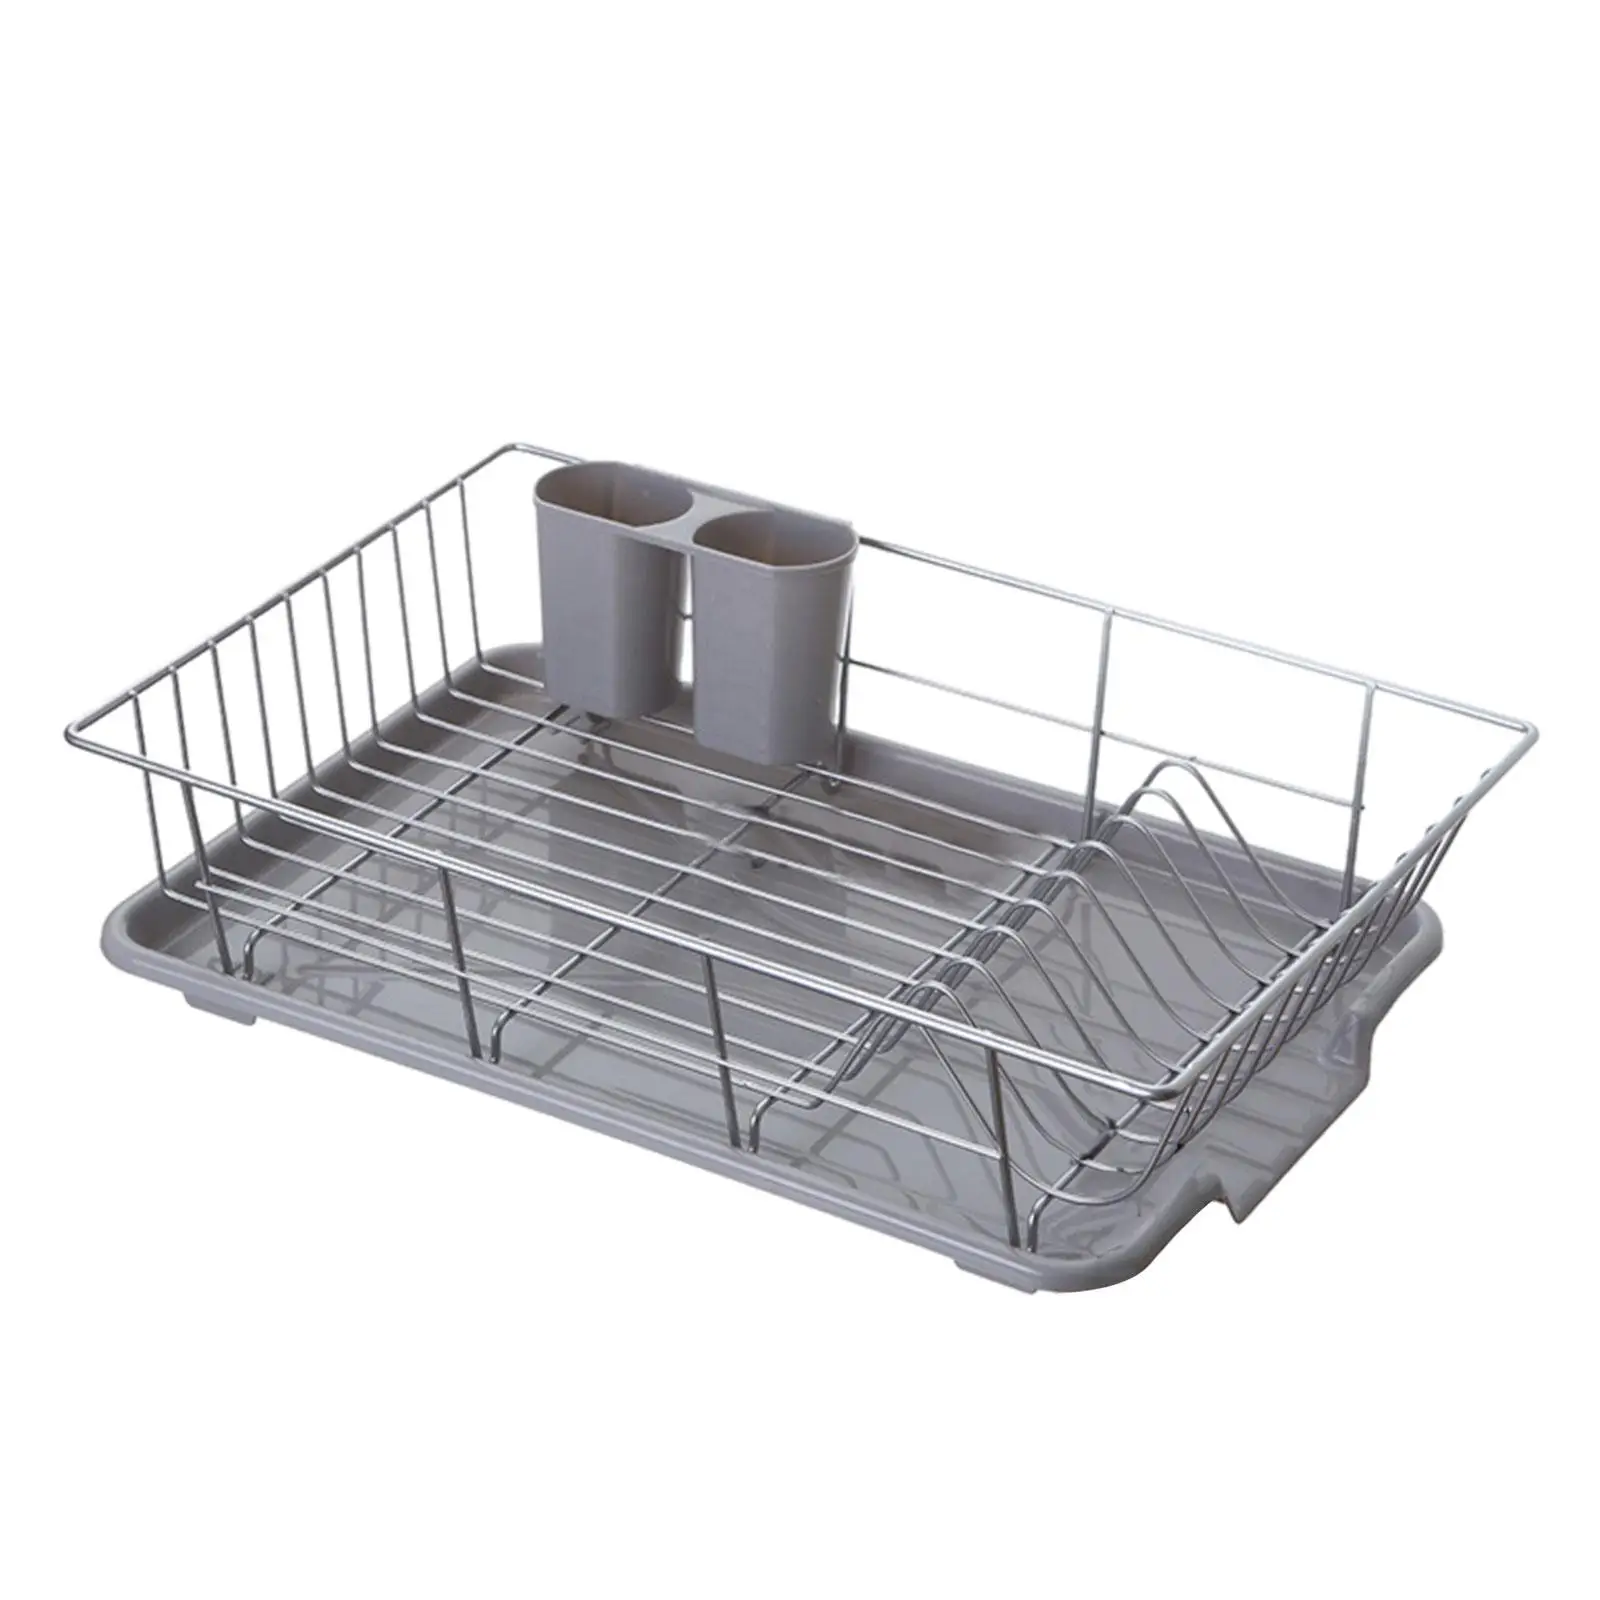 Counter Dish Drainer with Drainboard Multifunctional Self Draining Dish Dryer Dish Racks for Cups Forks Kitchen Bowls Countertop